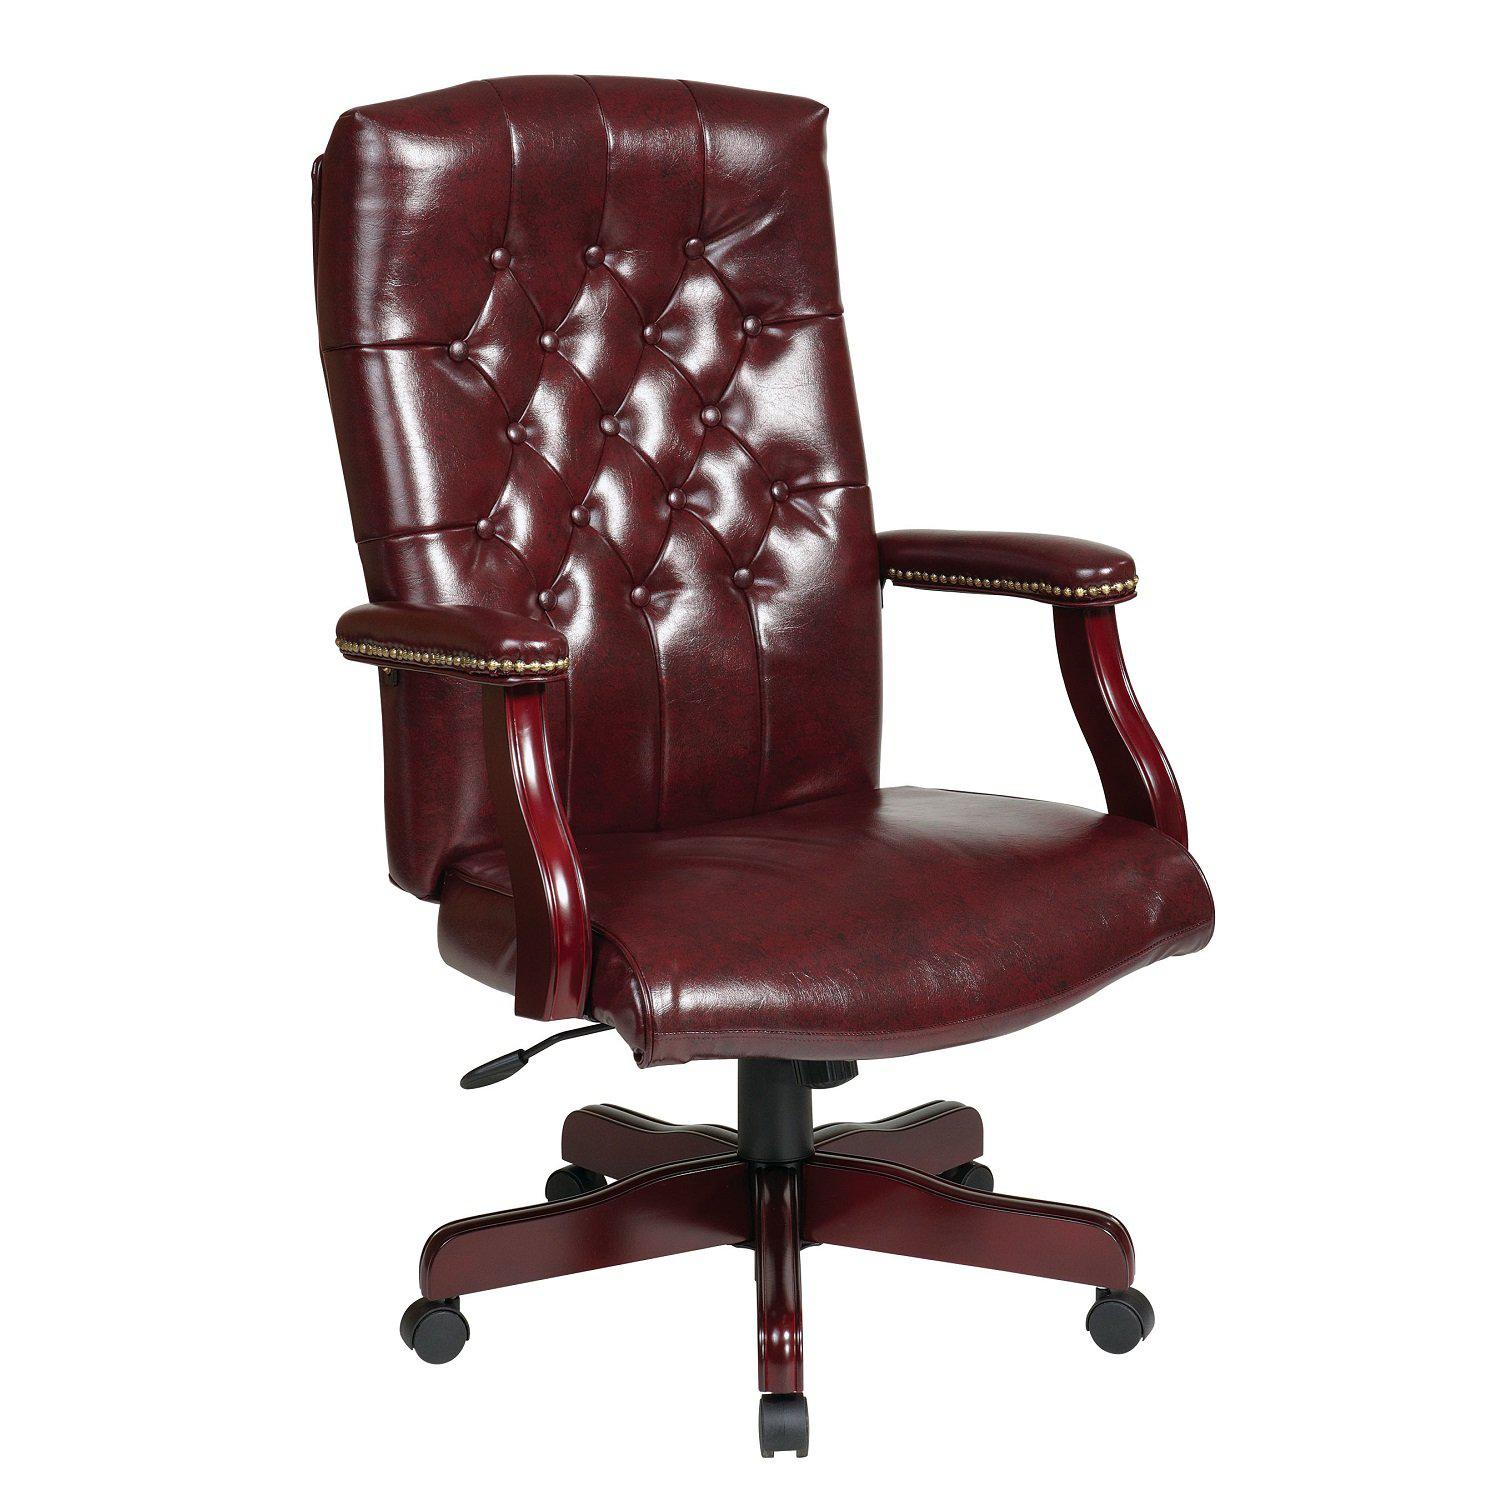 Traditional Executive Chair with Padded Arms